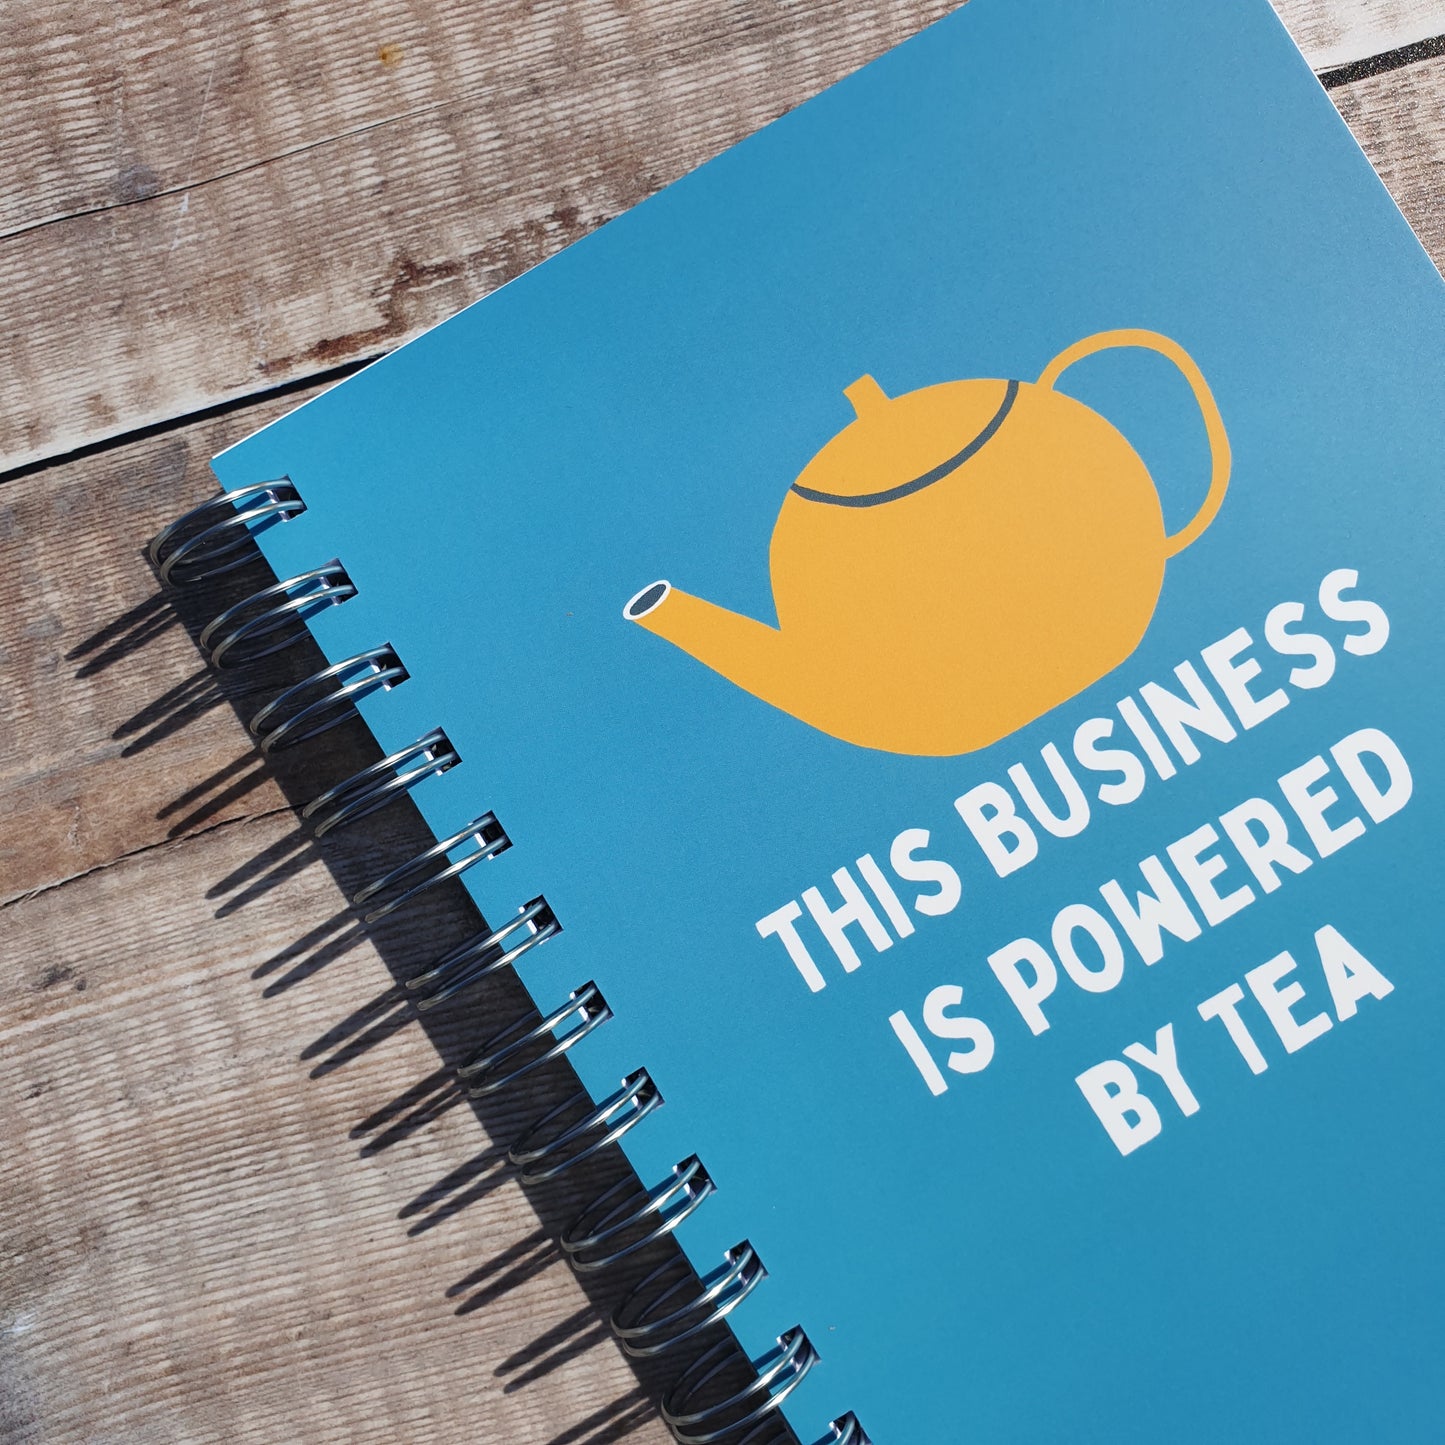 This Business is Powered by Tea Notebooks